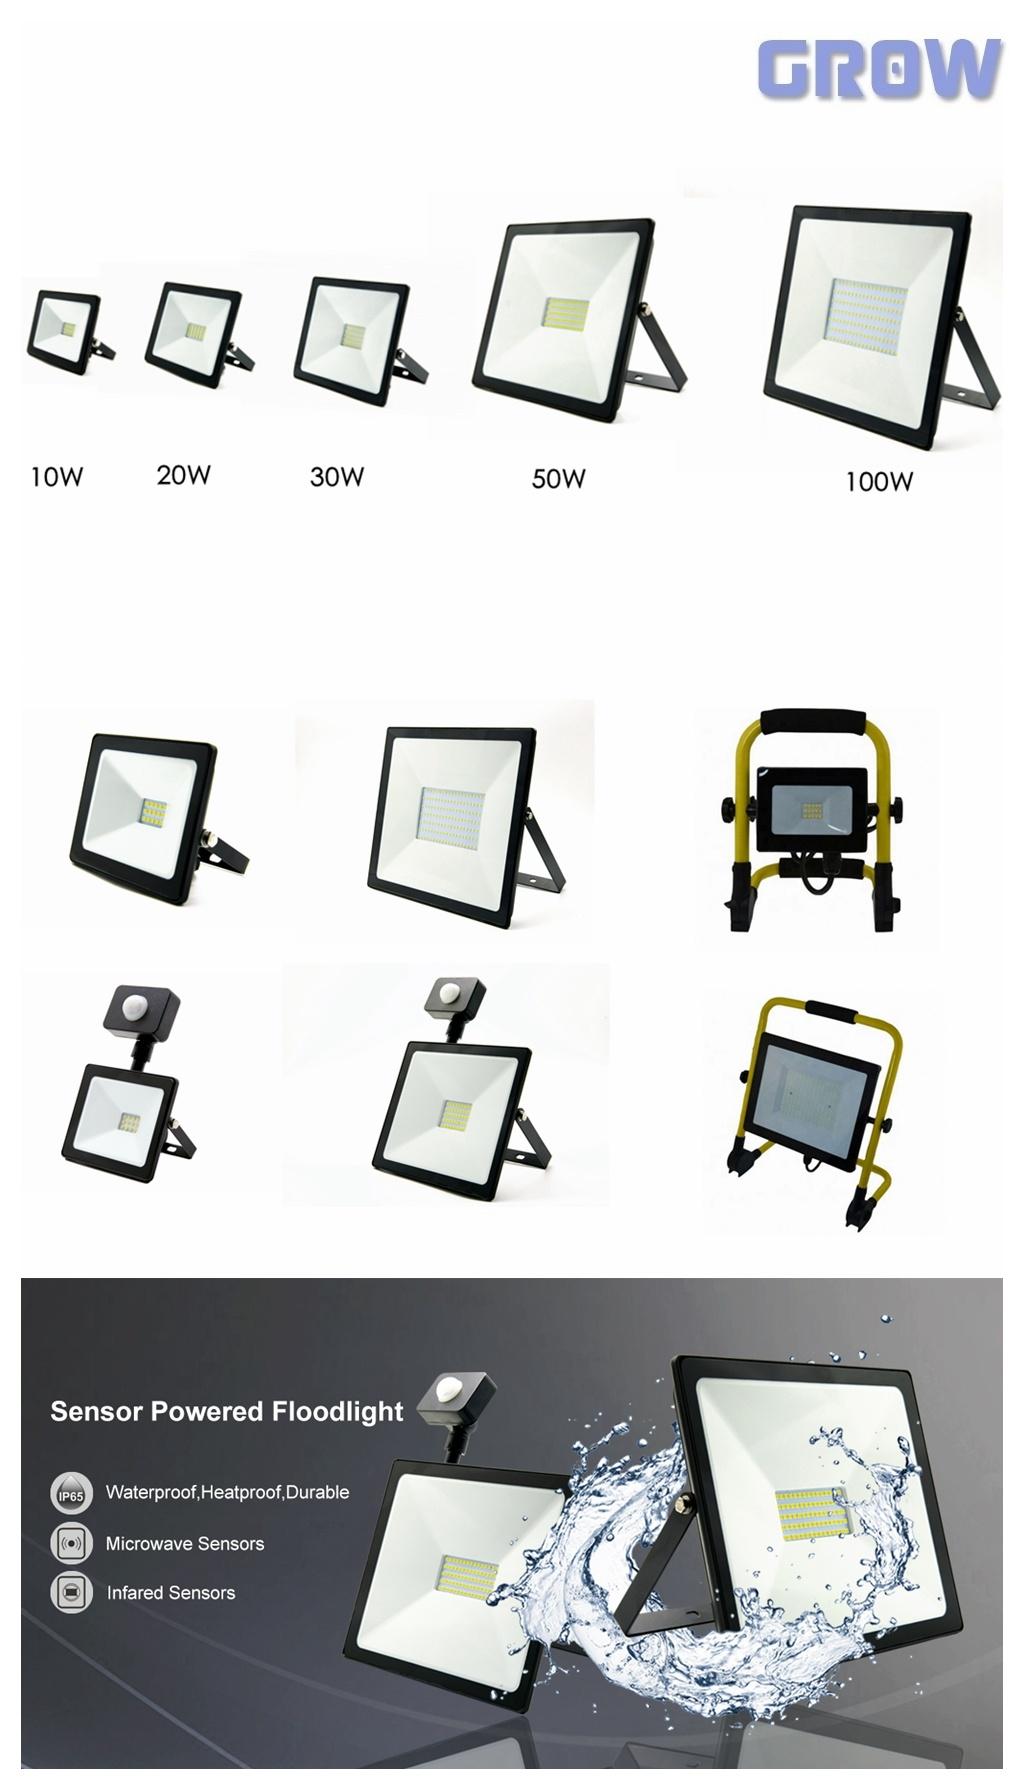 China Factory New ERP LED Flood Light IP65 Waterproof LED Floodlight 10W for Outdoor Industroal Lighting